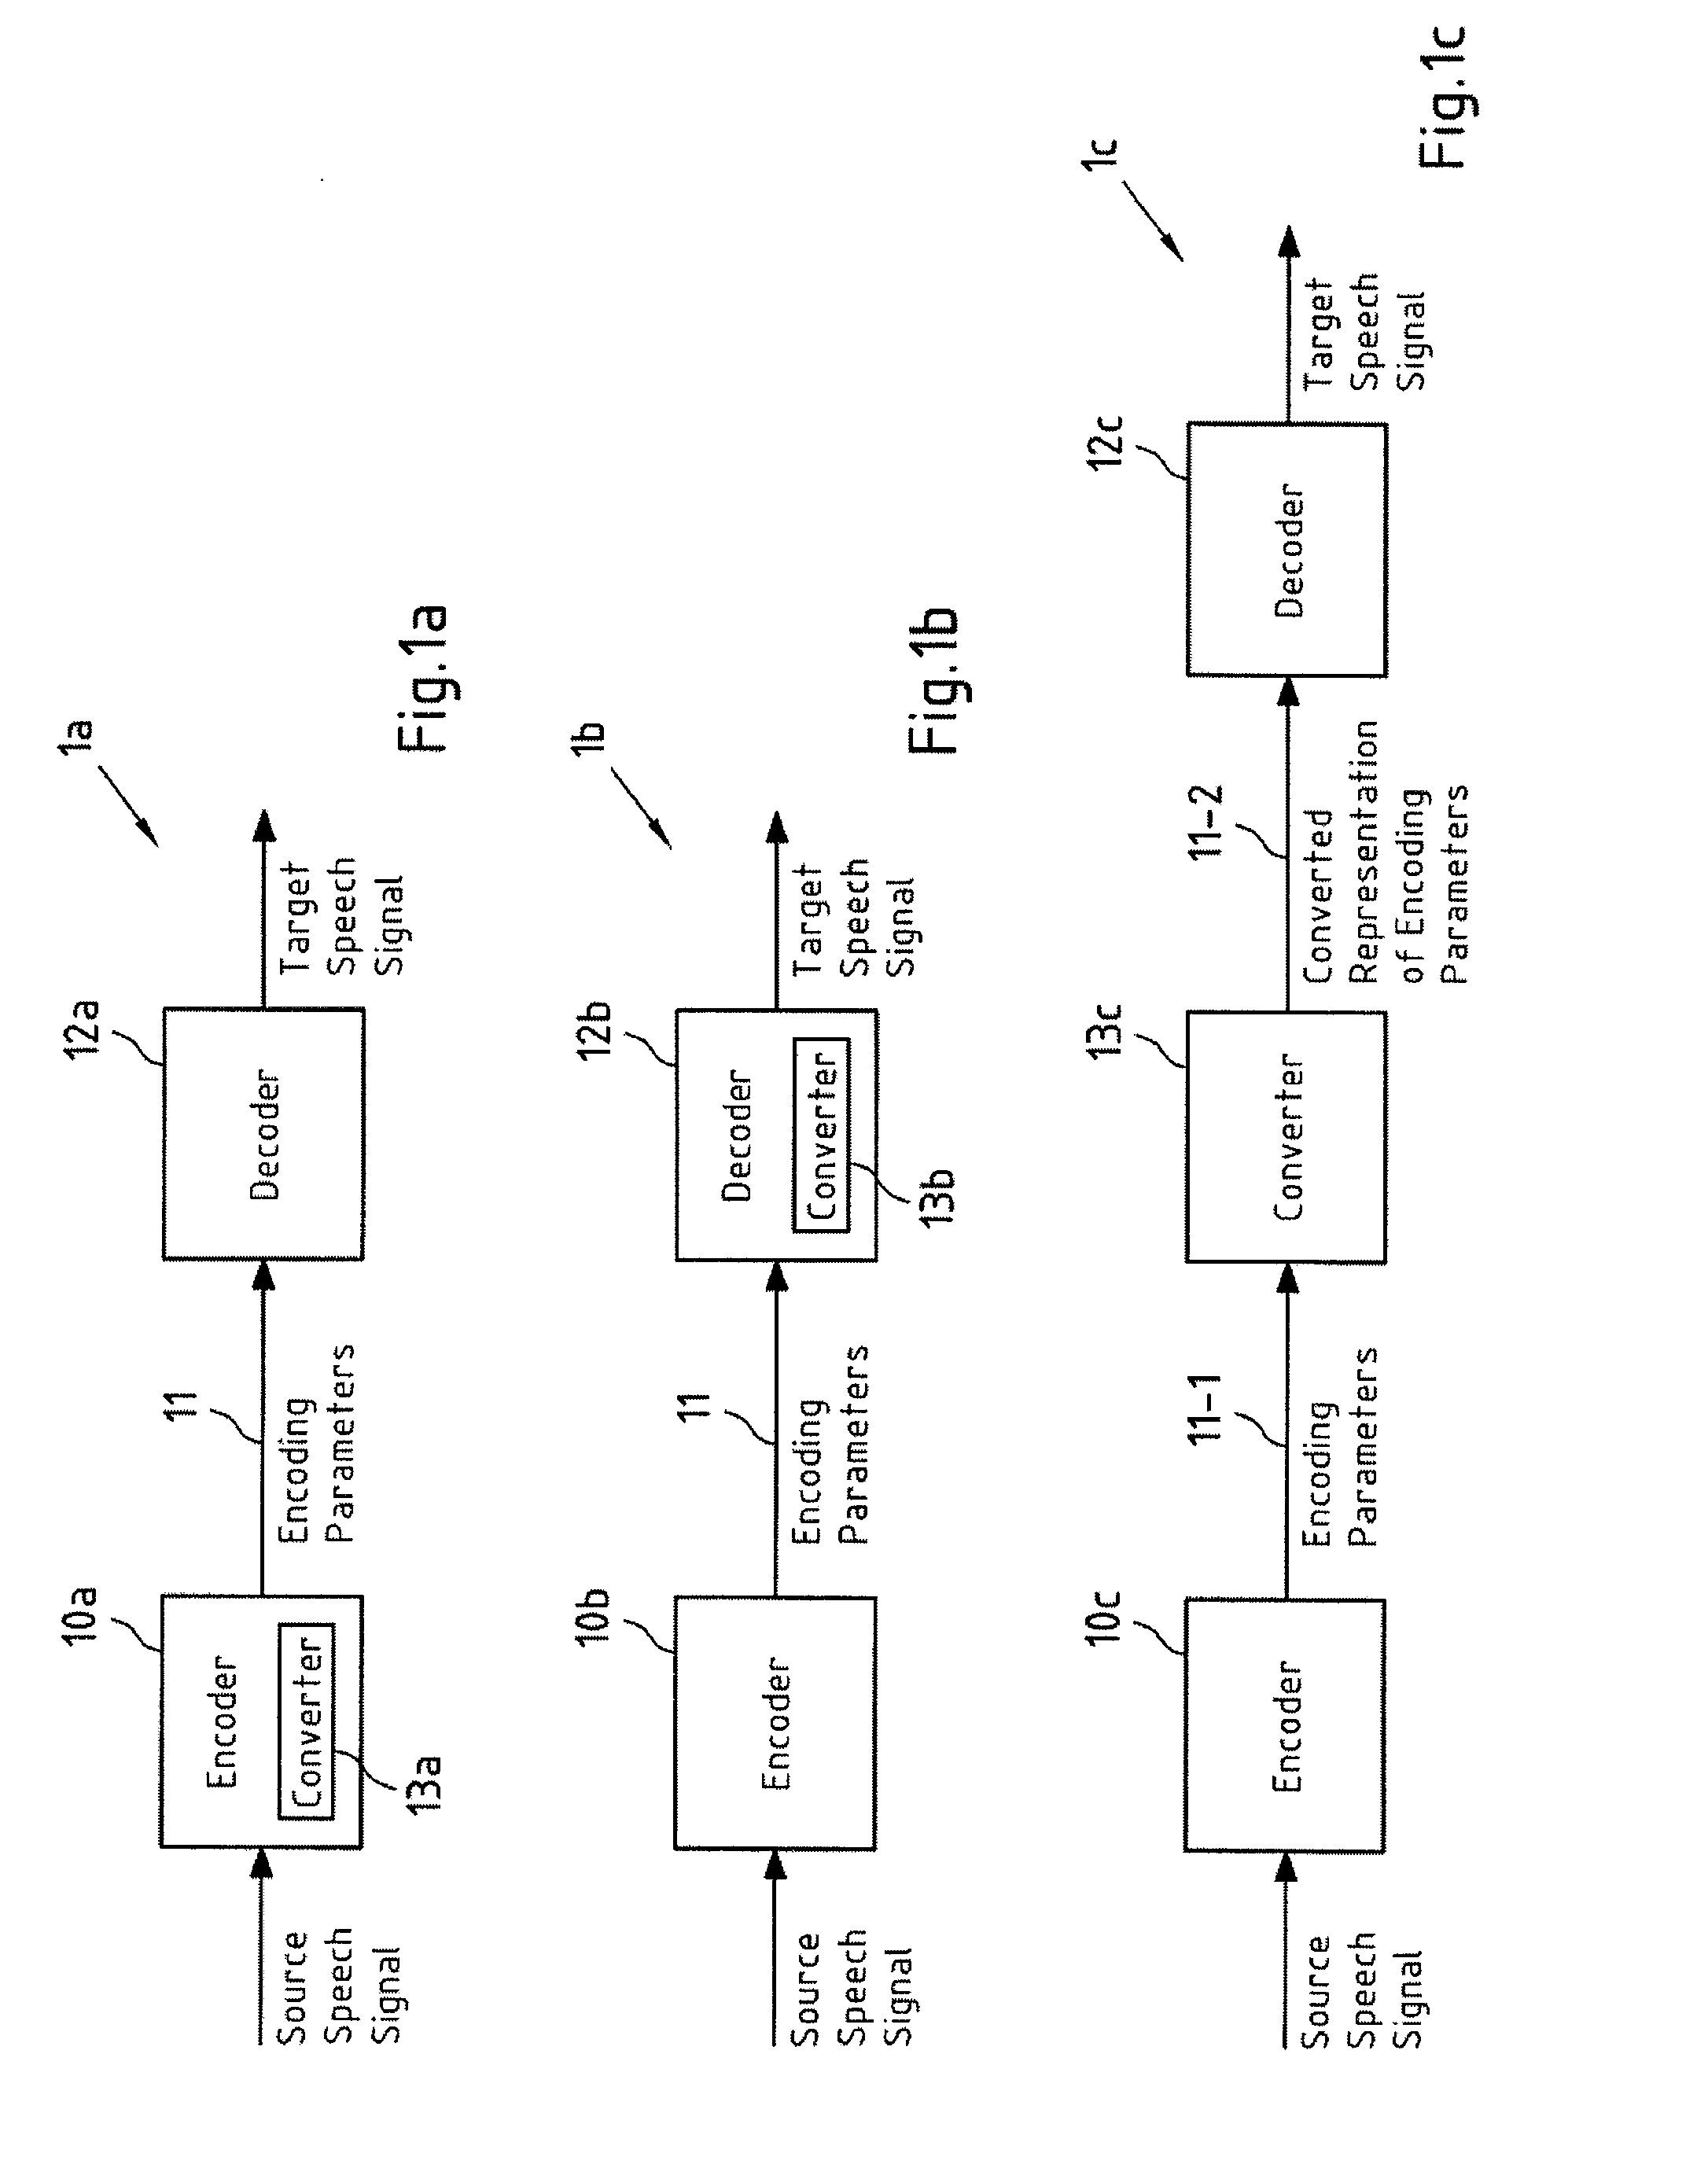 Apparatus, method and computer program product for advanced voice conversion